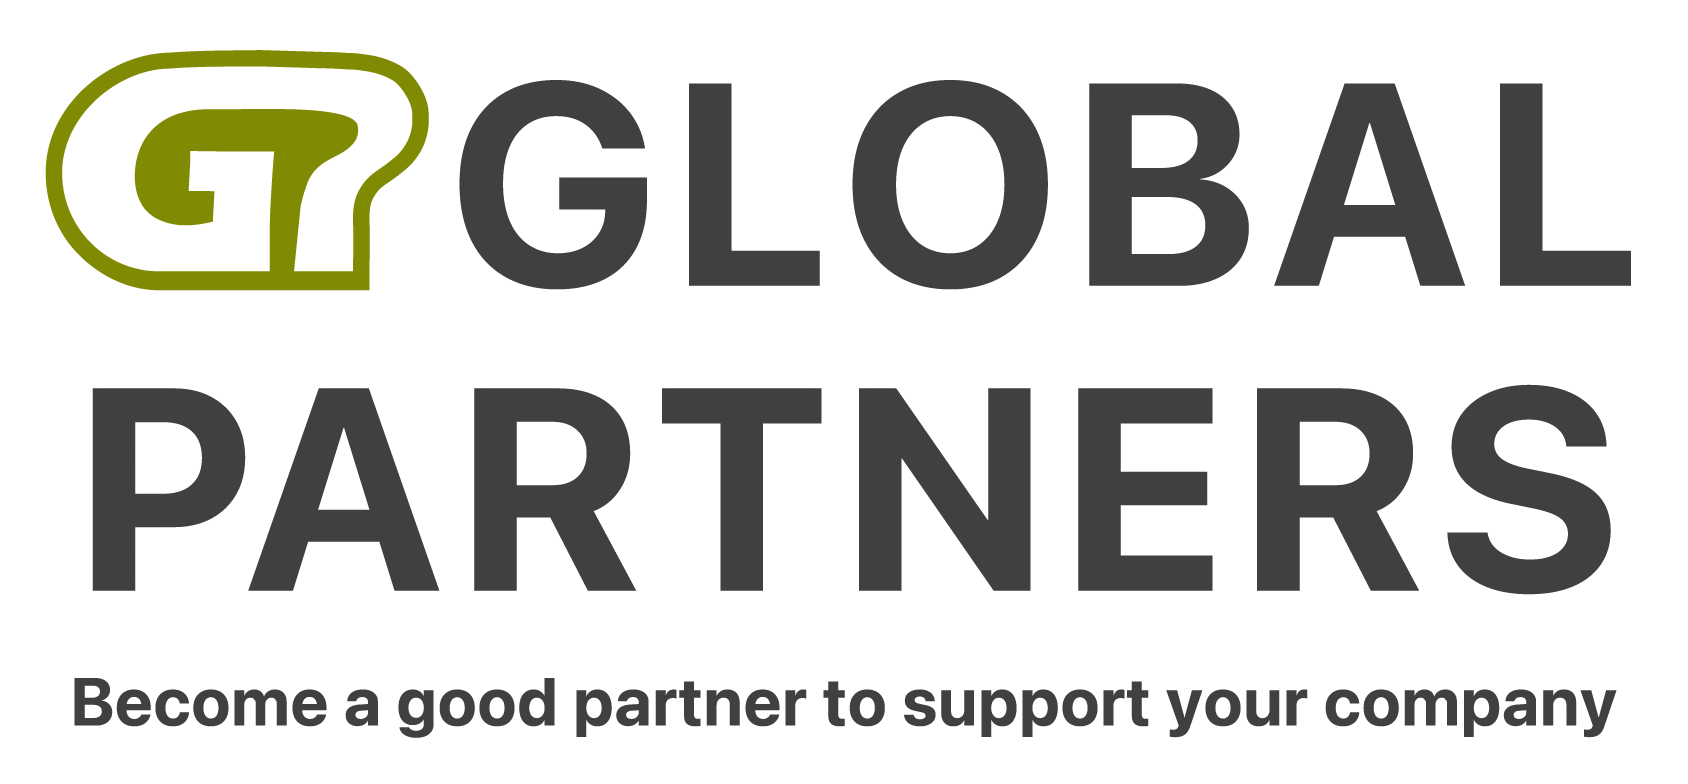 Become a good partner to support your company